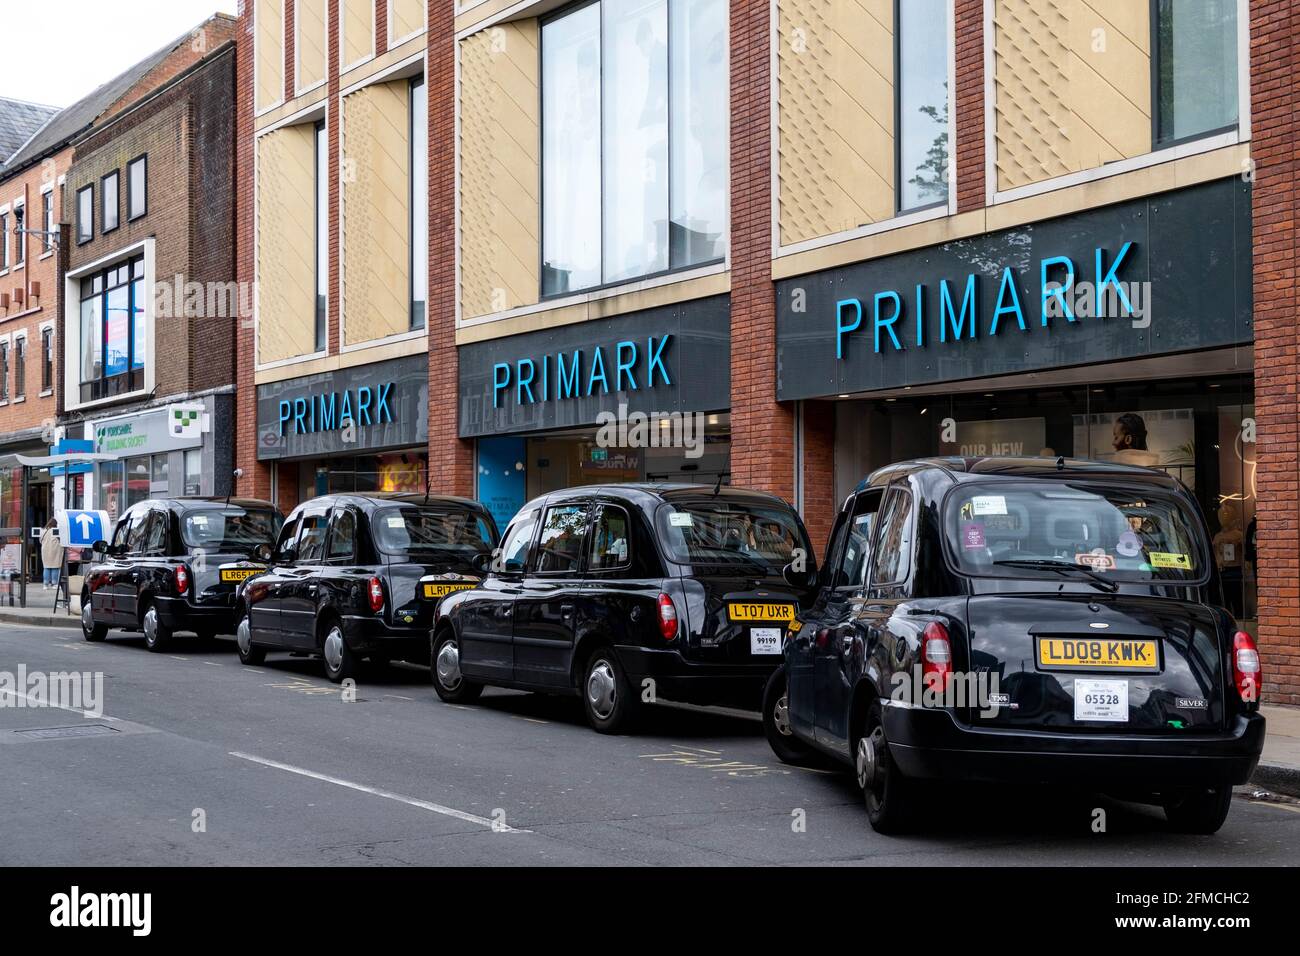 Kingston Upon Thames London UK, May 07 2021, Black London Taxis Parked  Outside A Primark Department Store In A Town Centre High Street Stock Photo  - Alamy